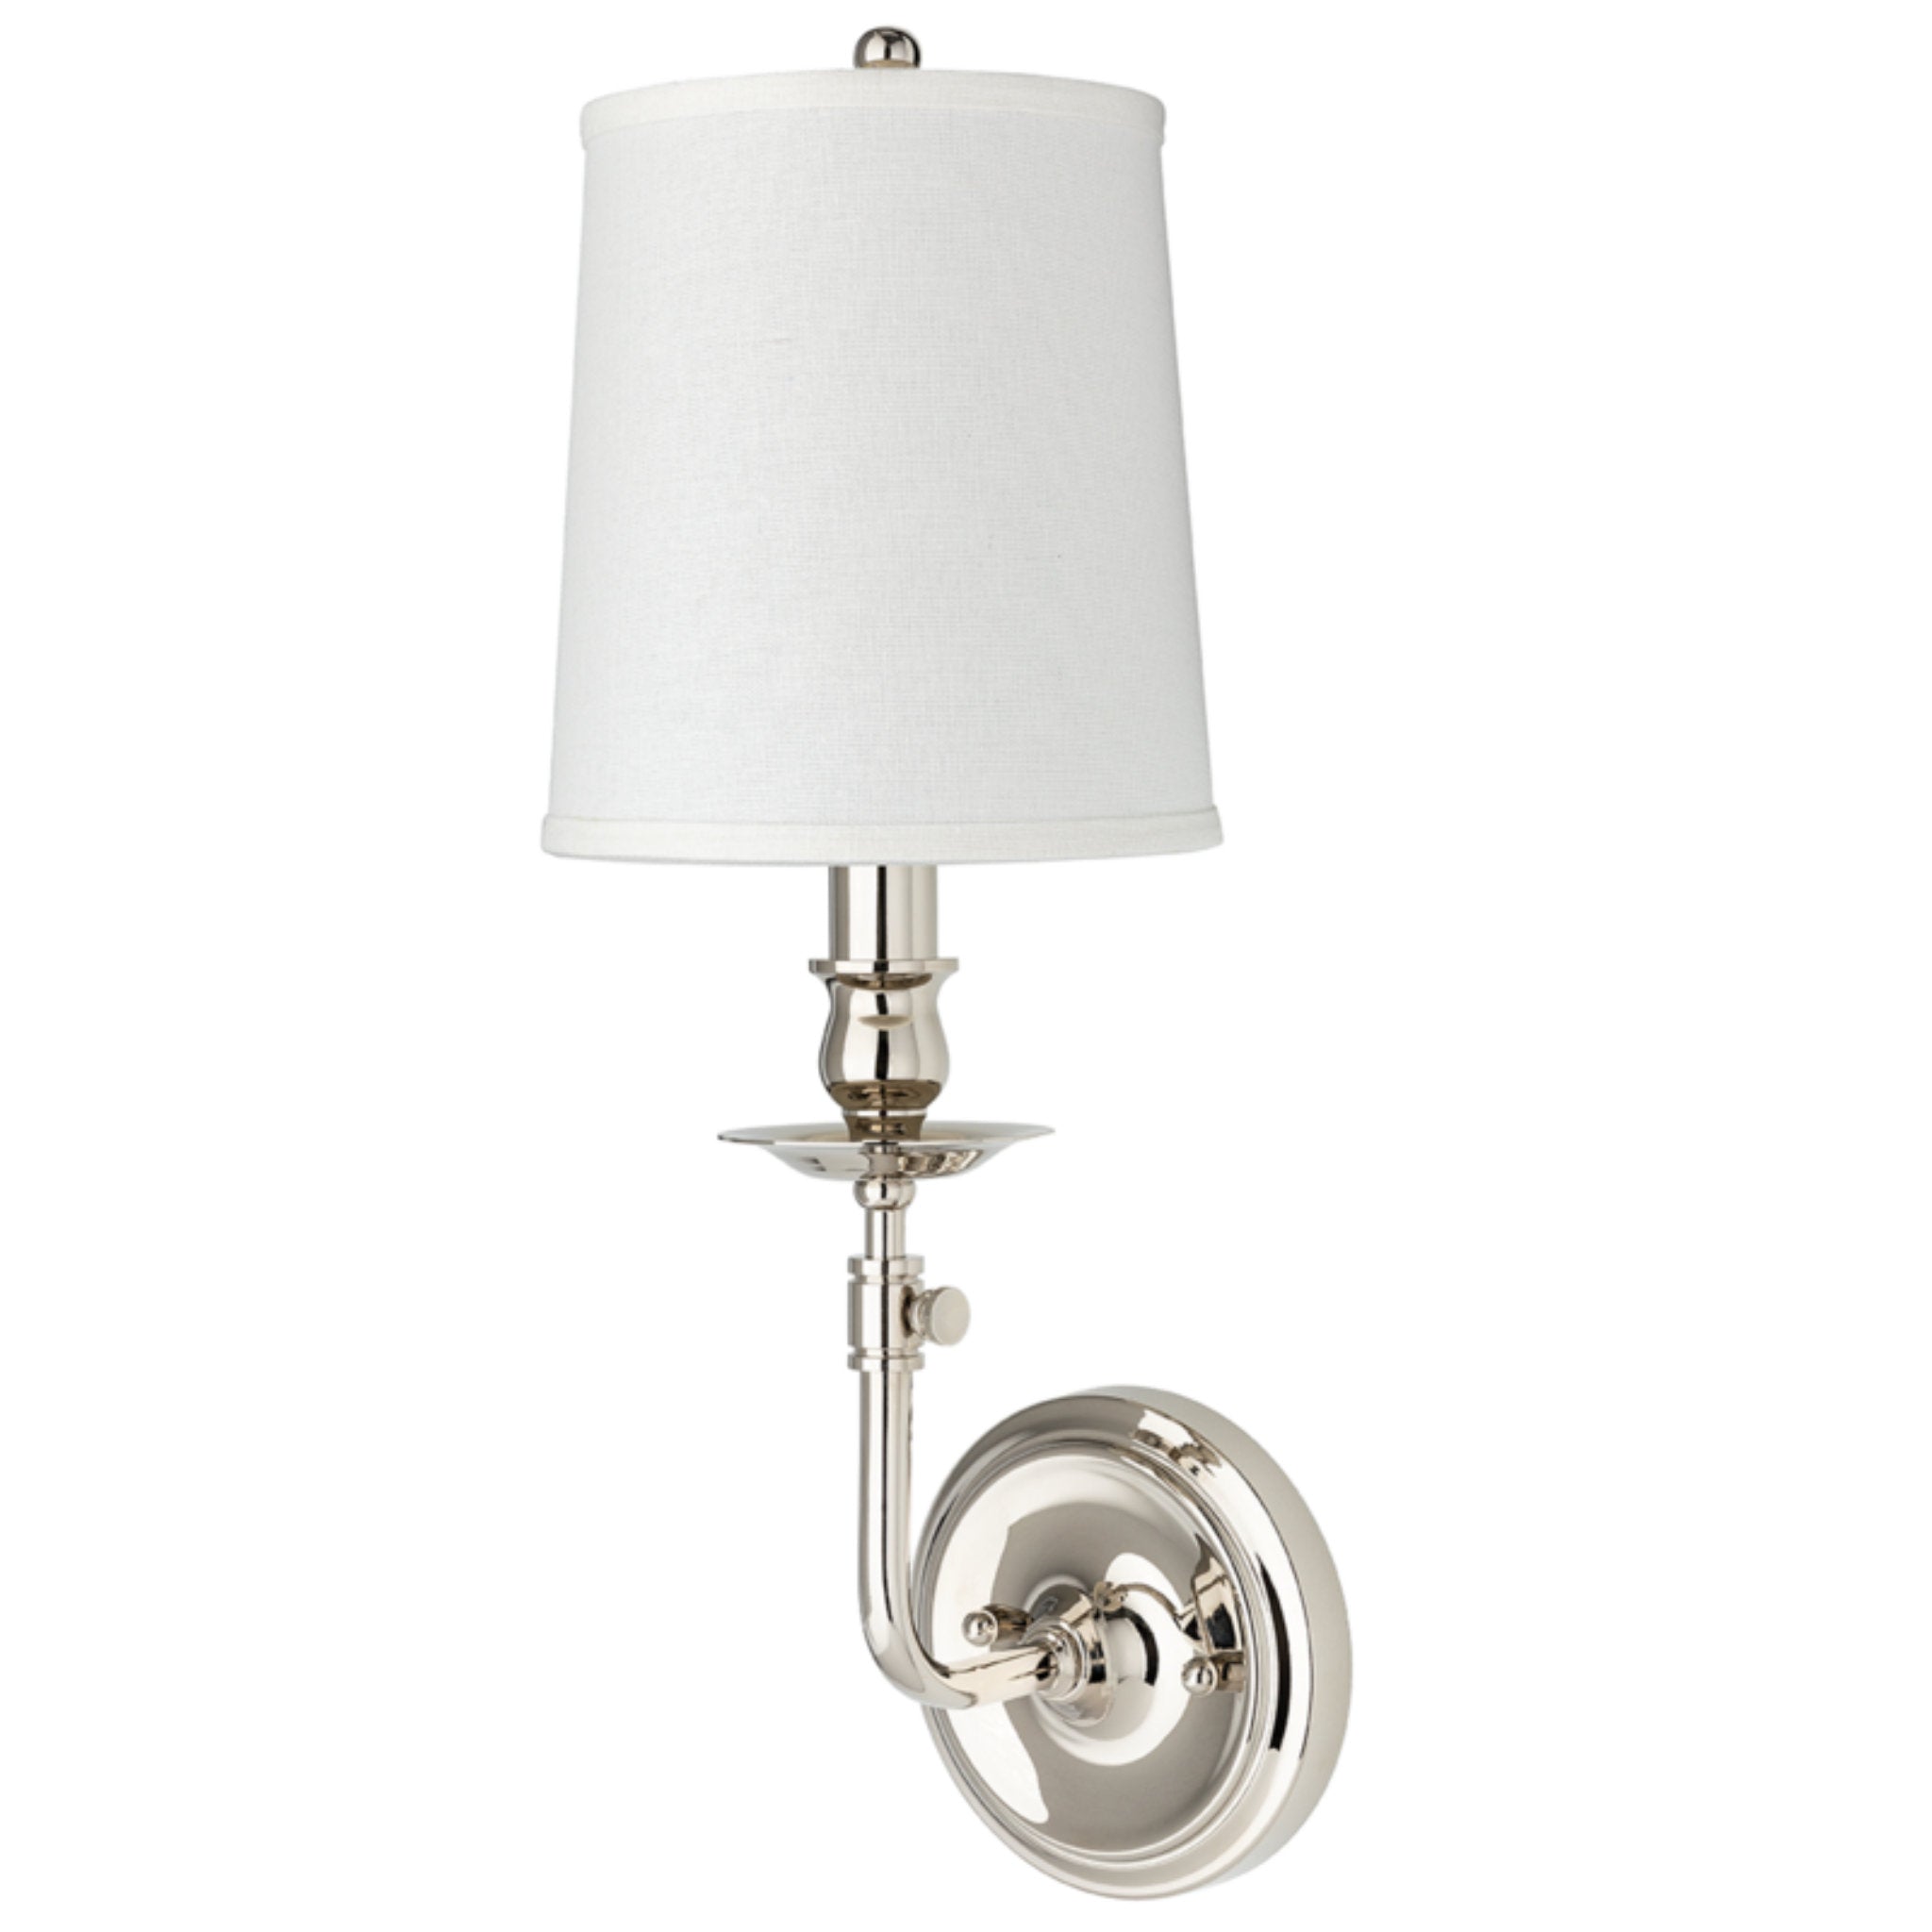 Logan 1 Light Wall Sconce in Polished Nickel